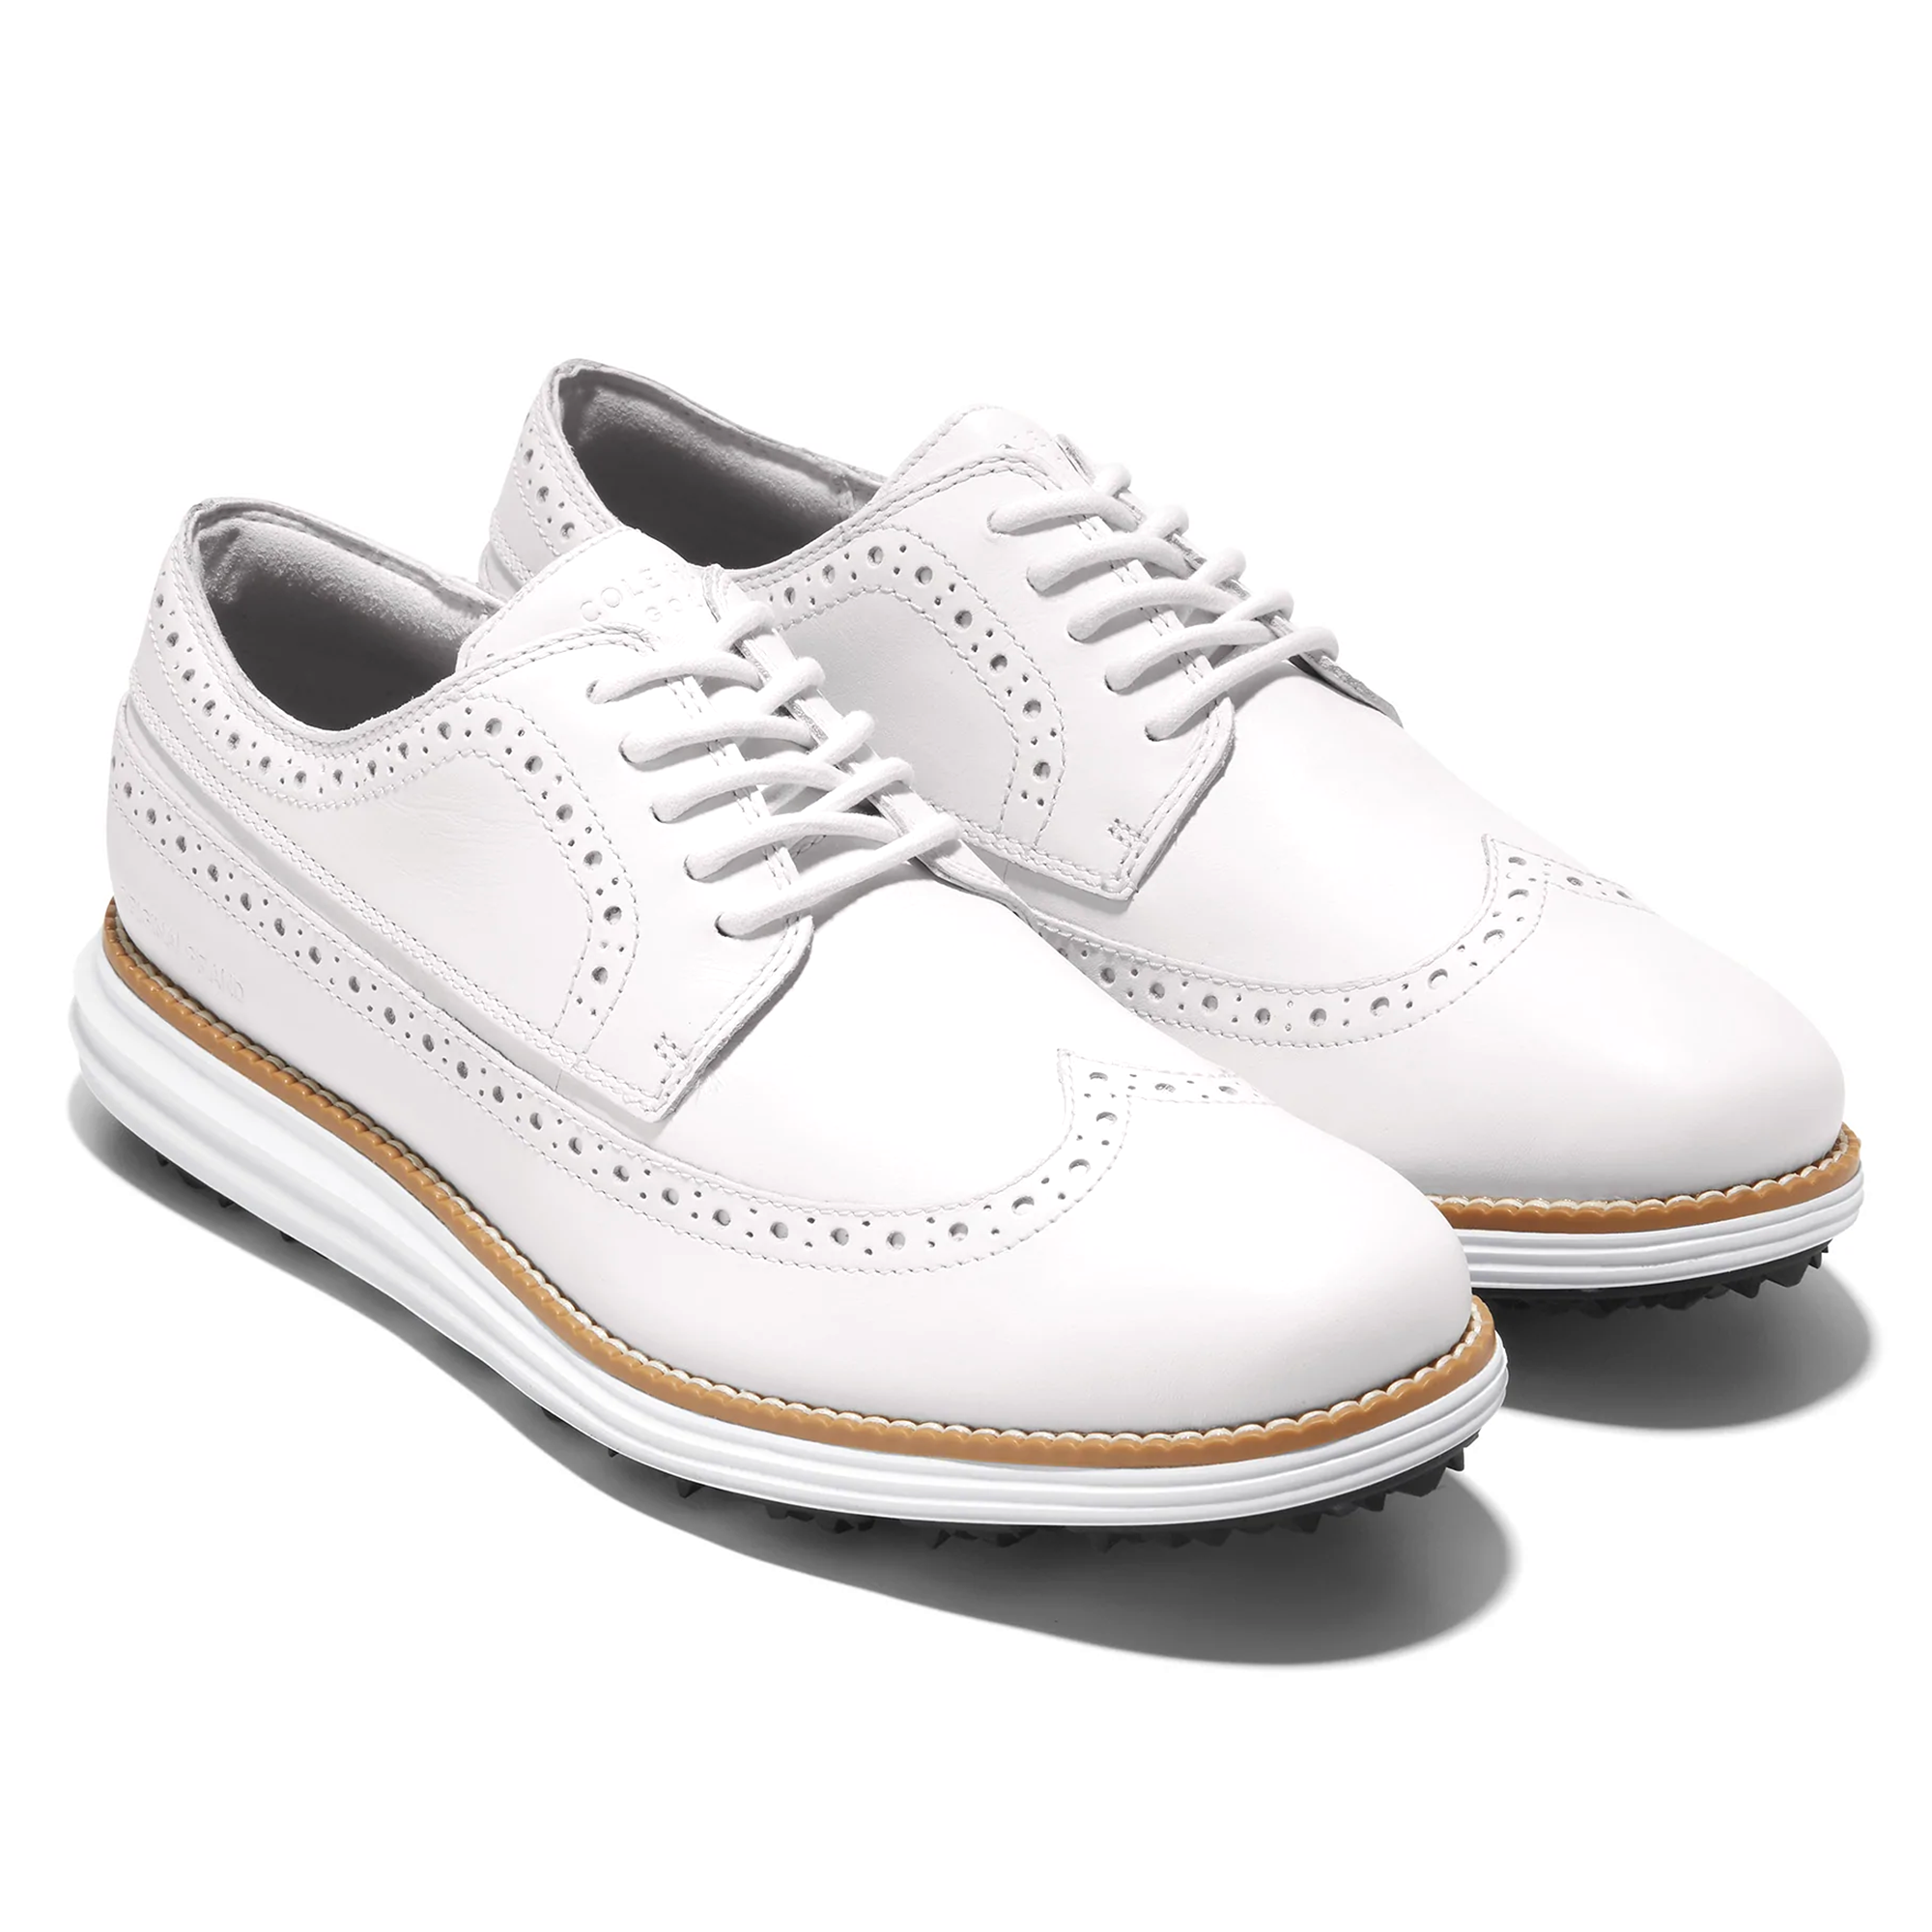 Cole Haan OriginalGrand Wing Ox Golf Shoes C37230 Optic White Natural ...